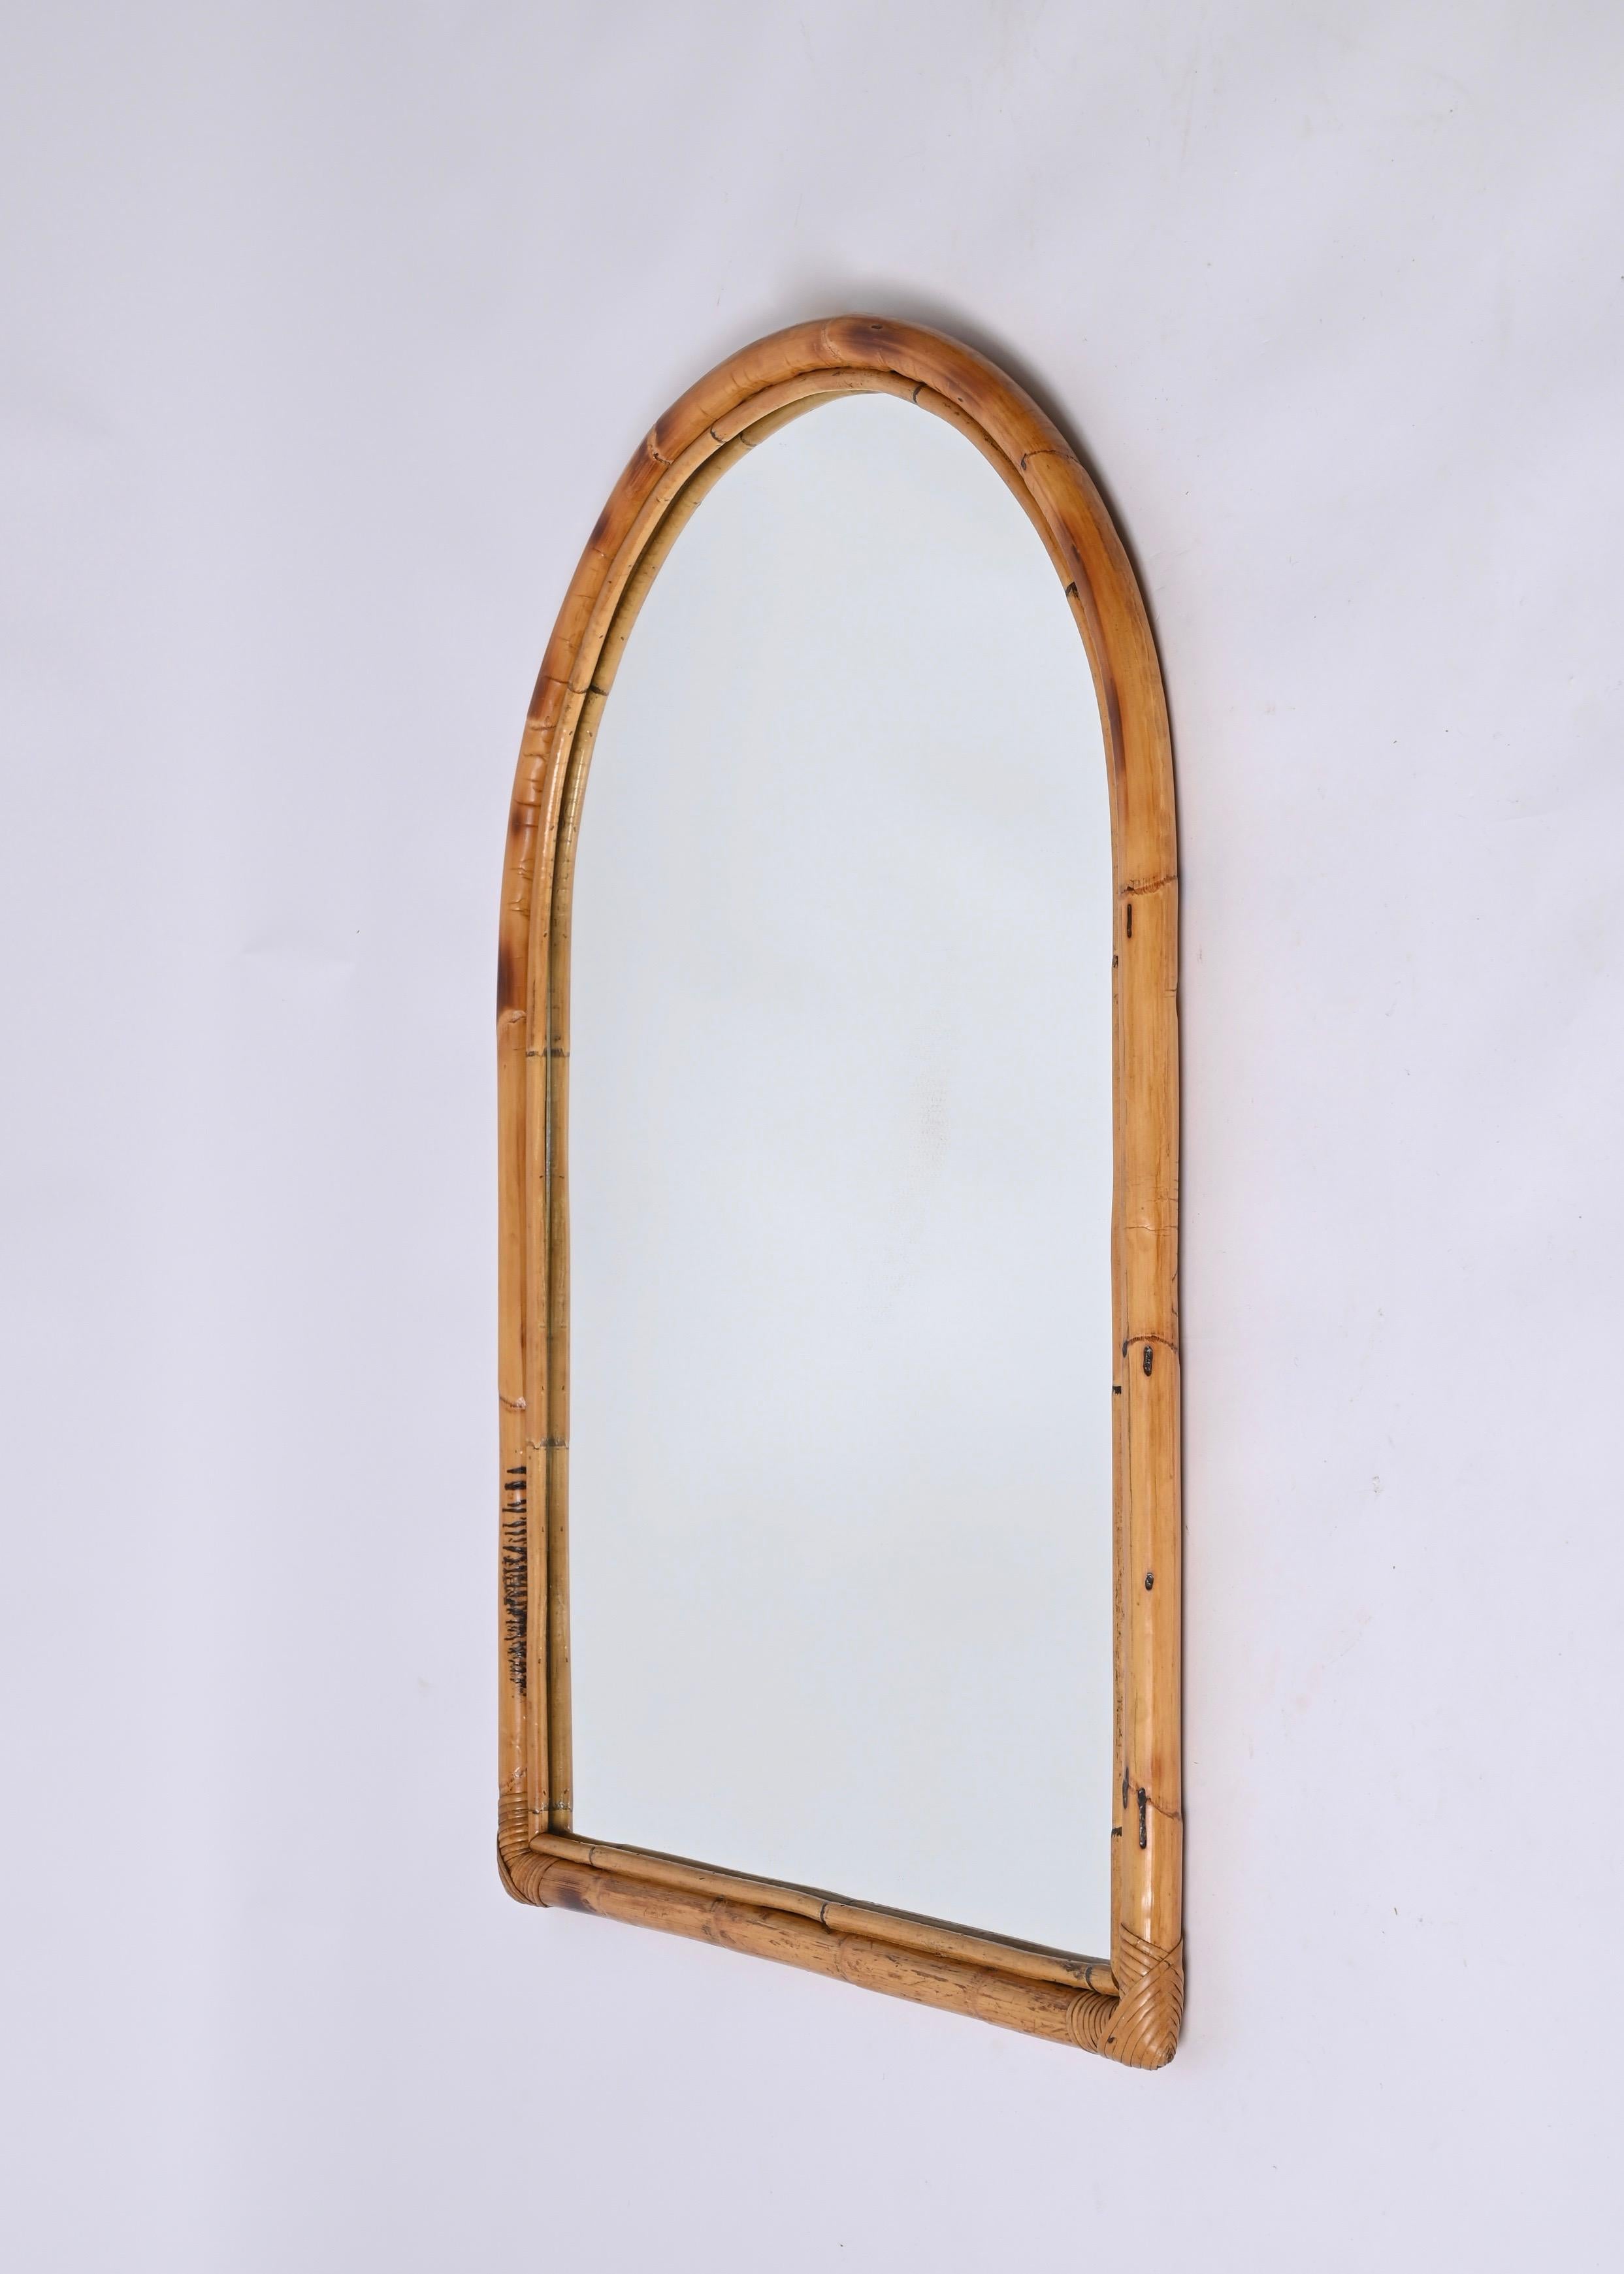 Midcentury Italian Arch Mirror with Double Bamboo and Rattan Frame, Italy, 1970s For Sale 10